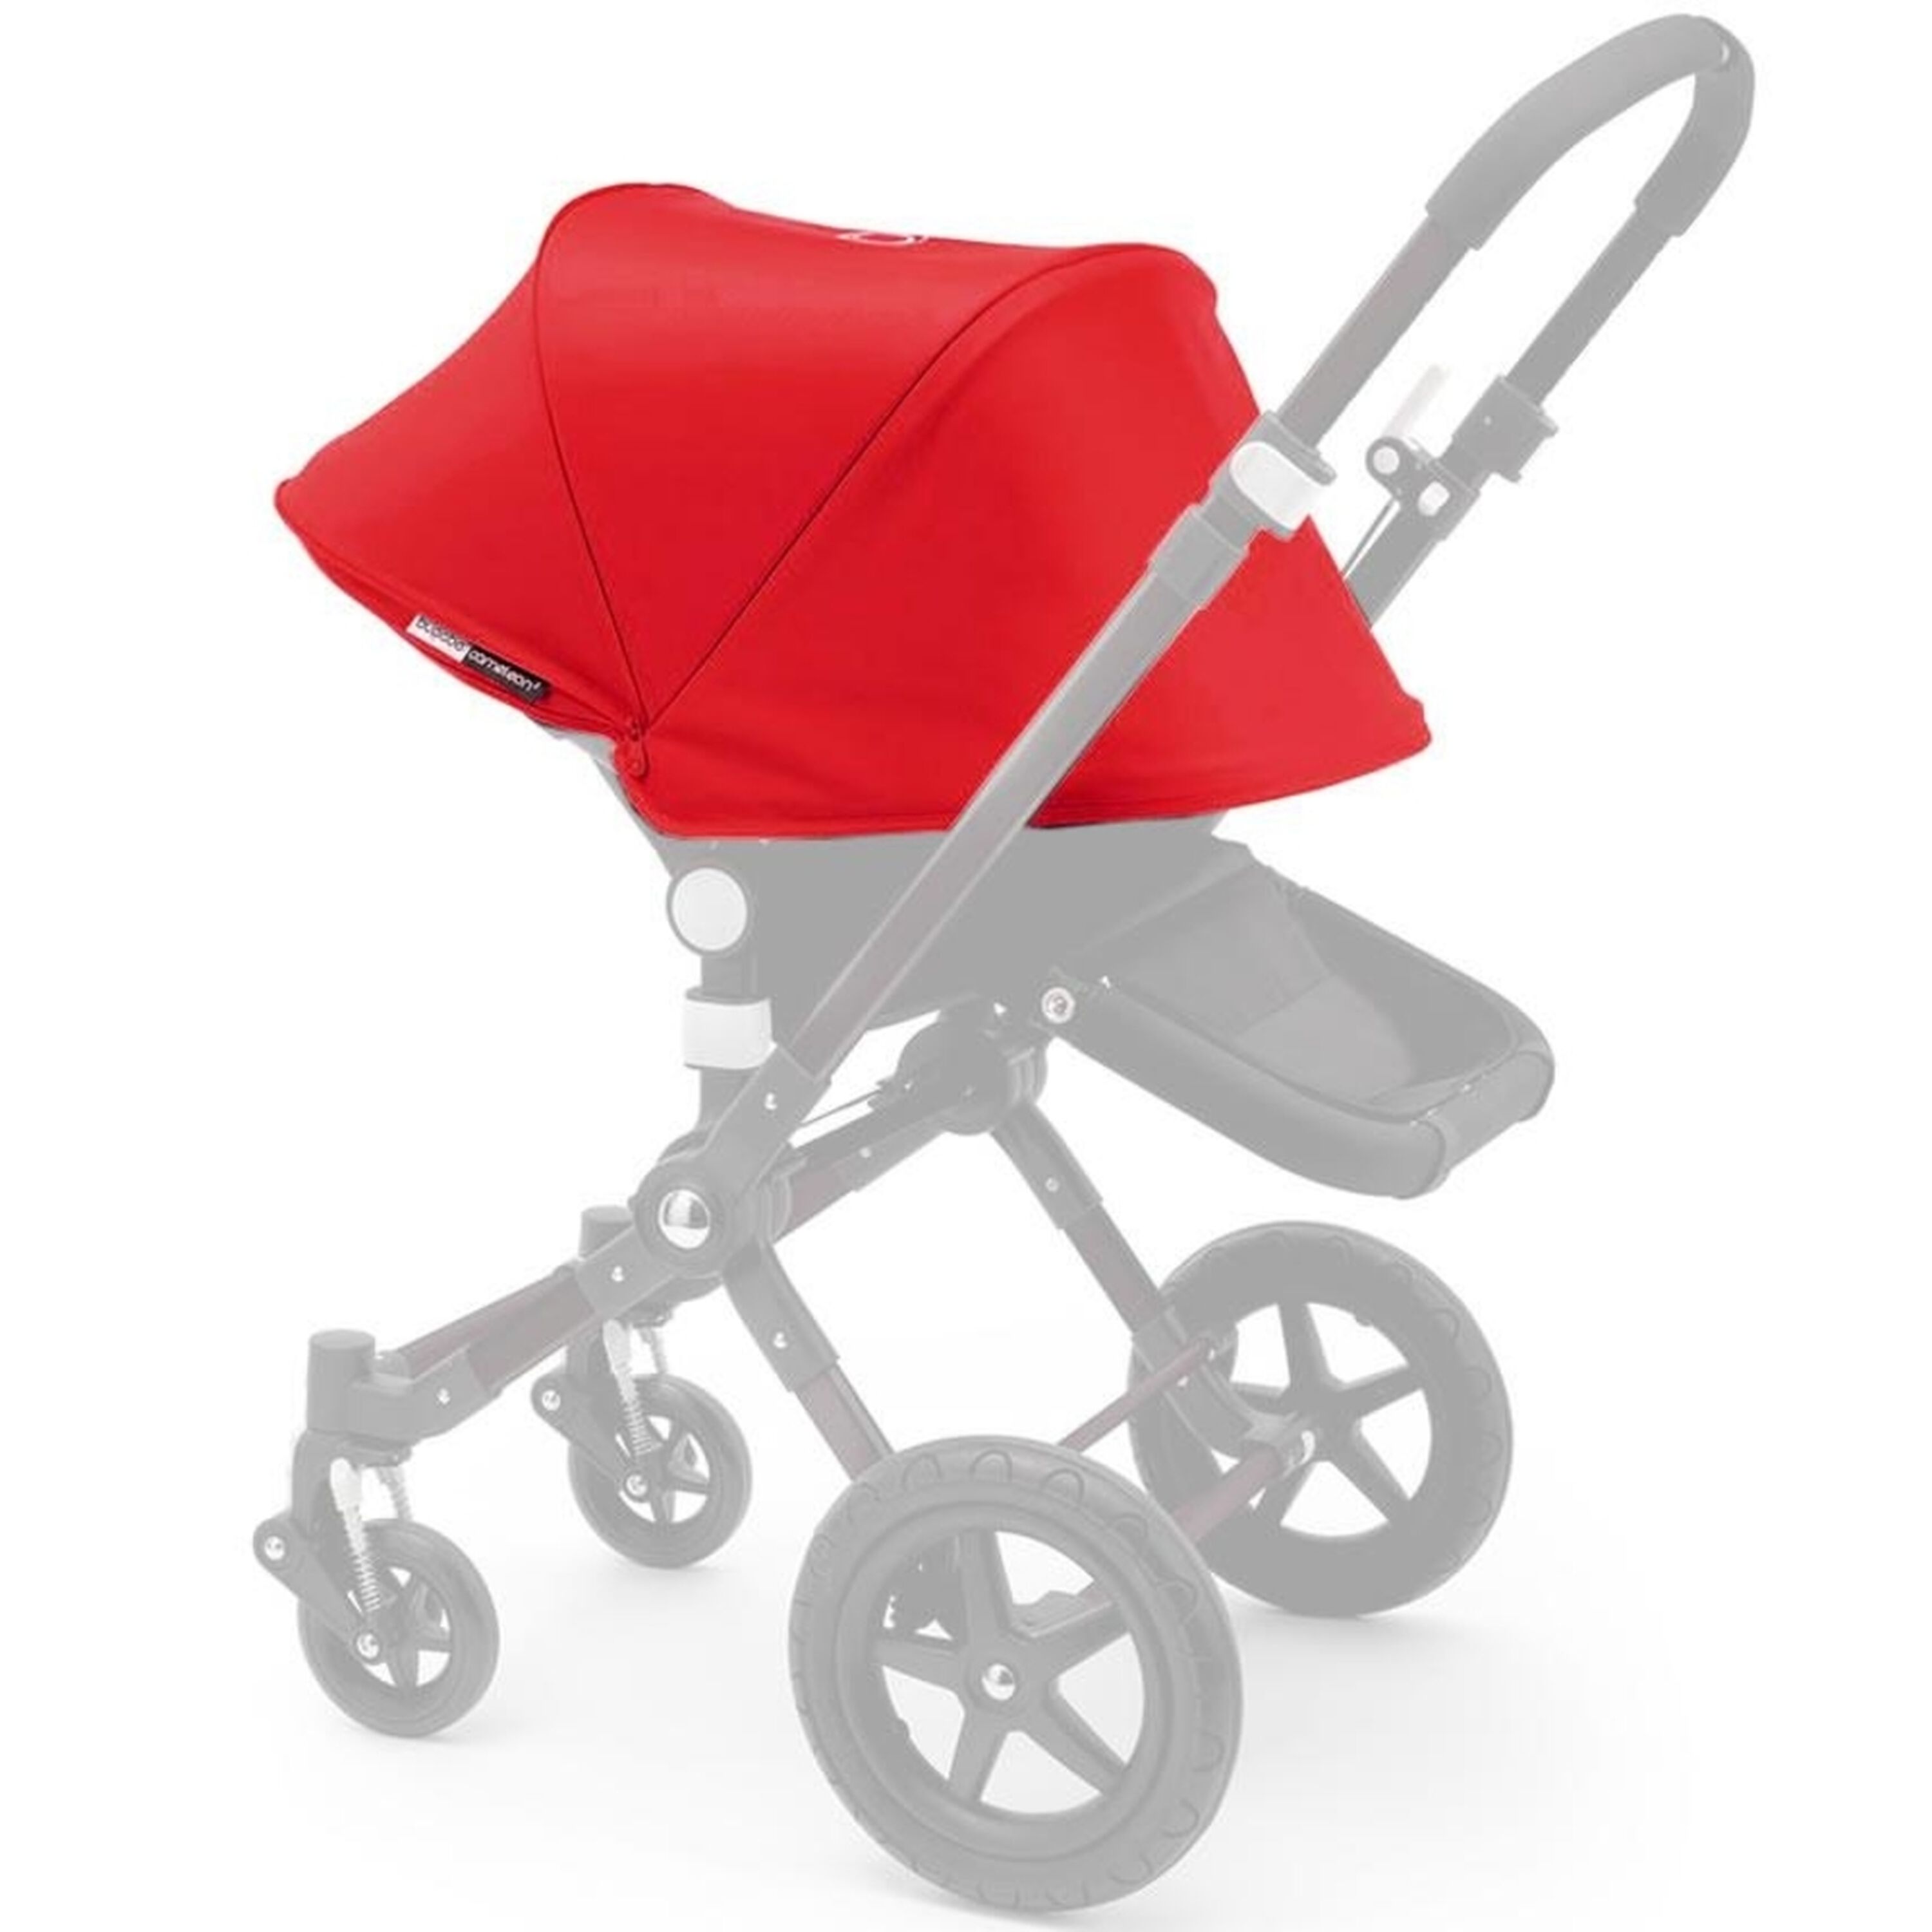 Bugaboo Recalls Cameleon3 Strollers Due to Fall Hazard